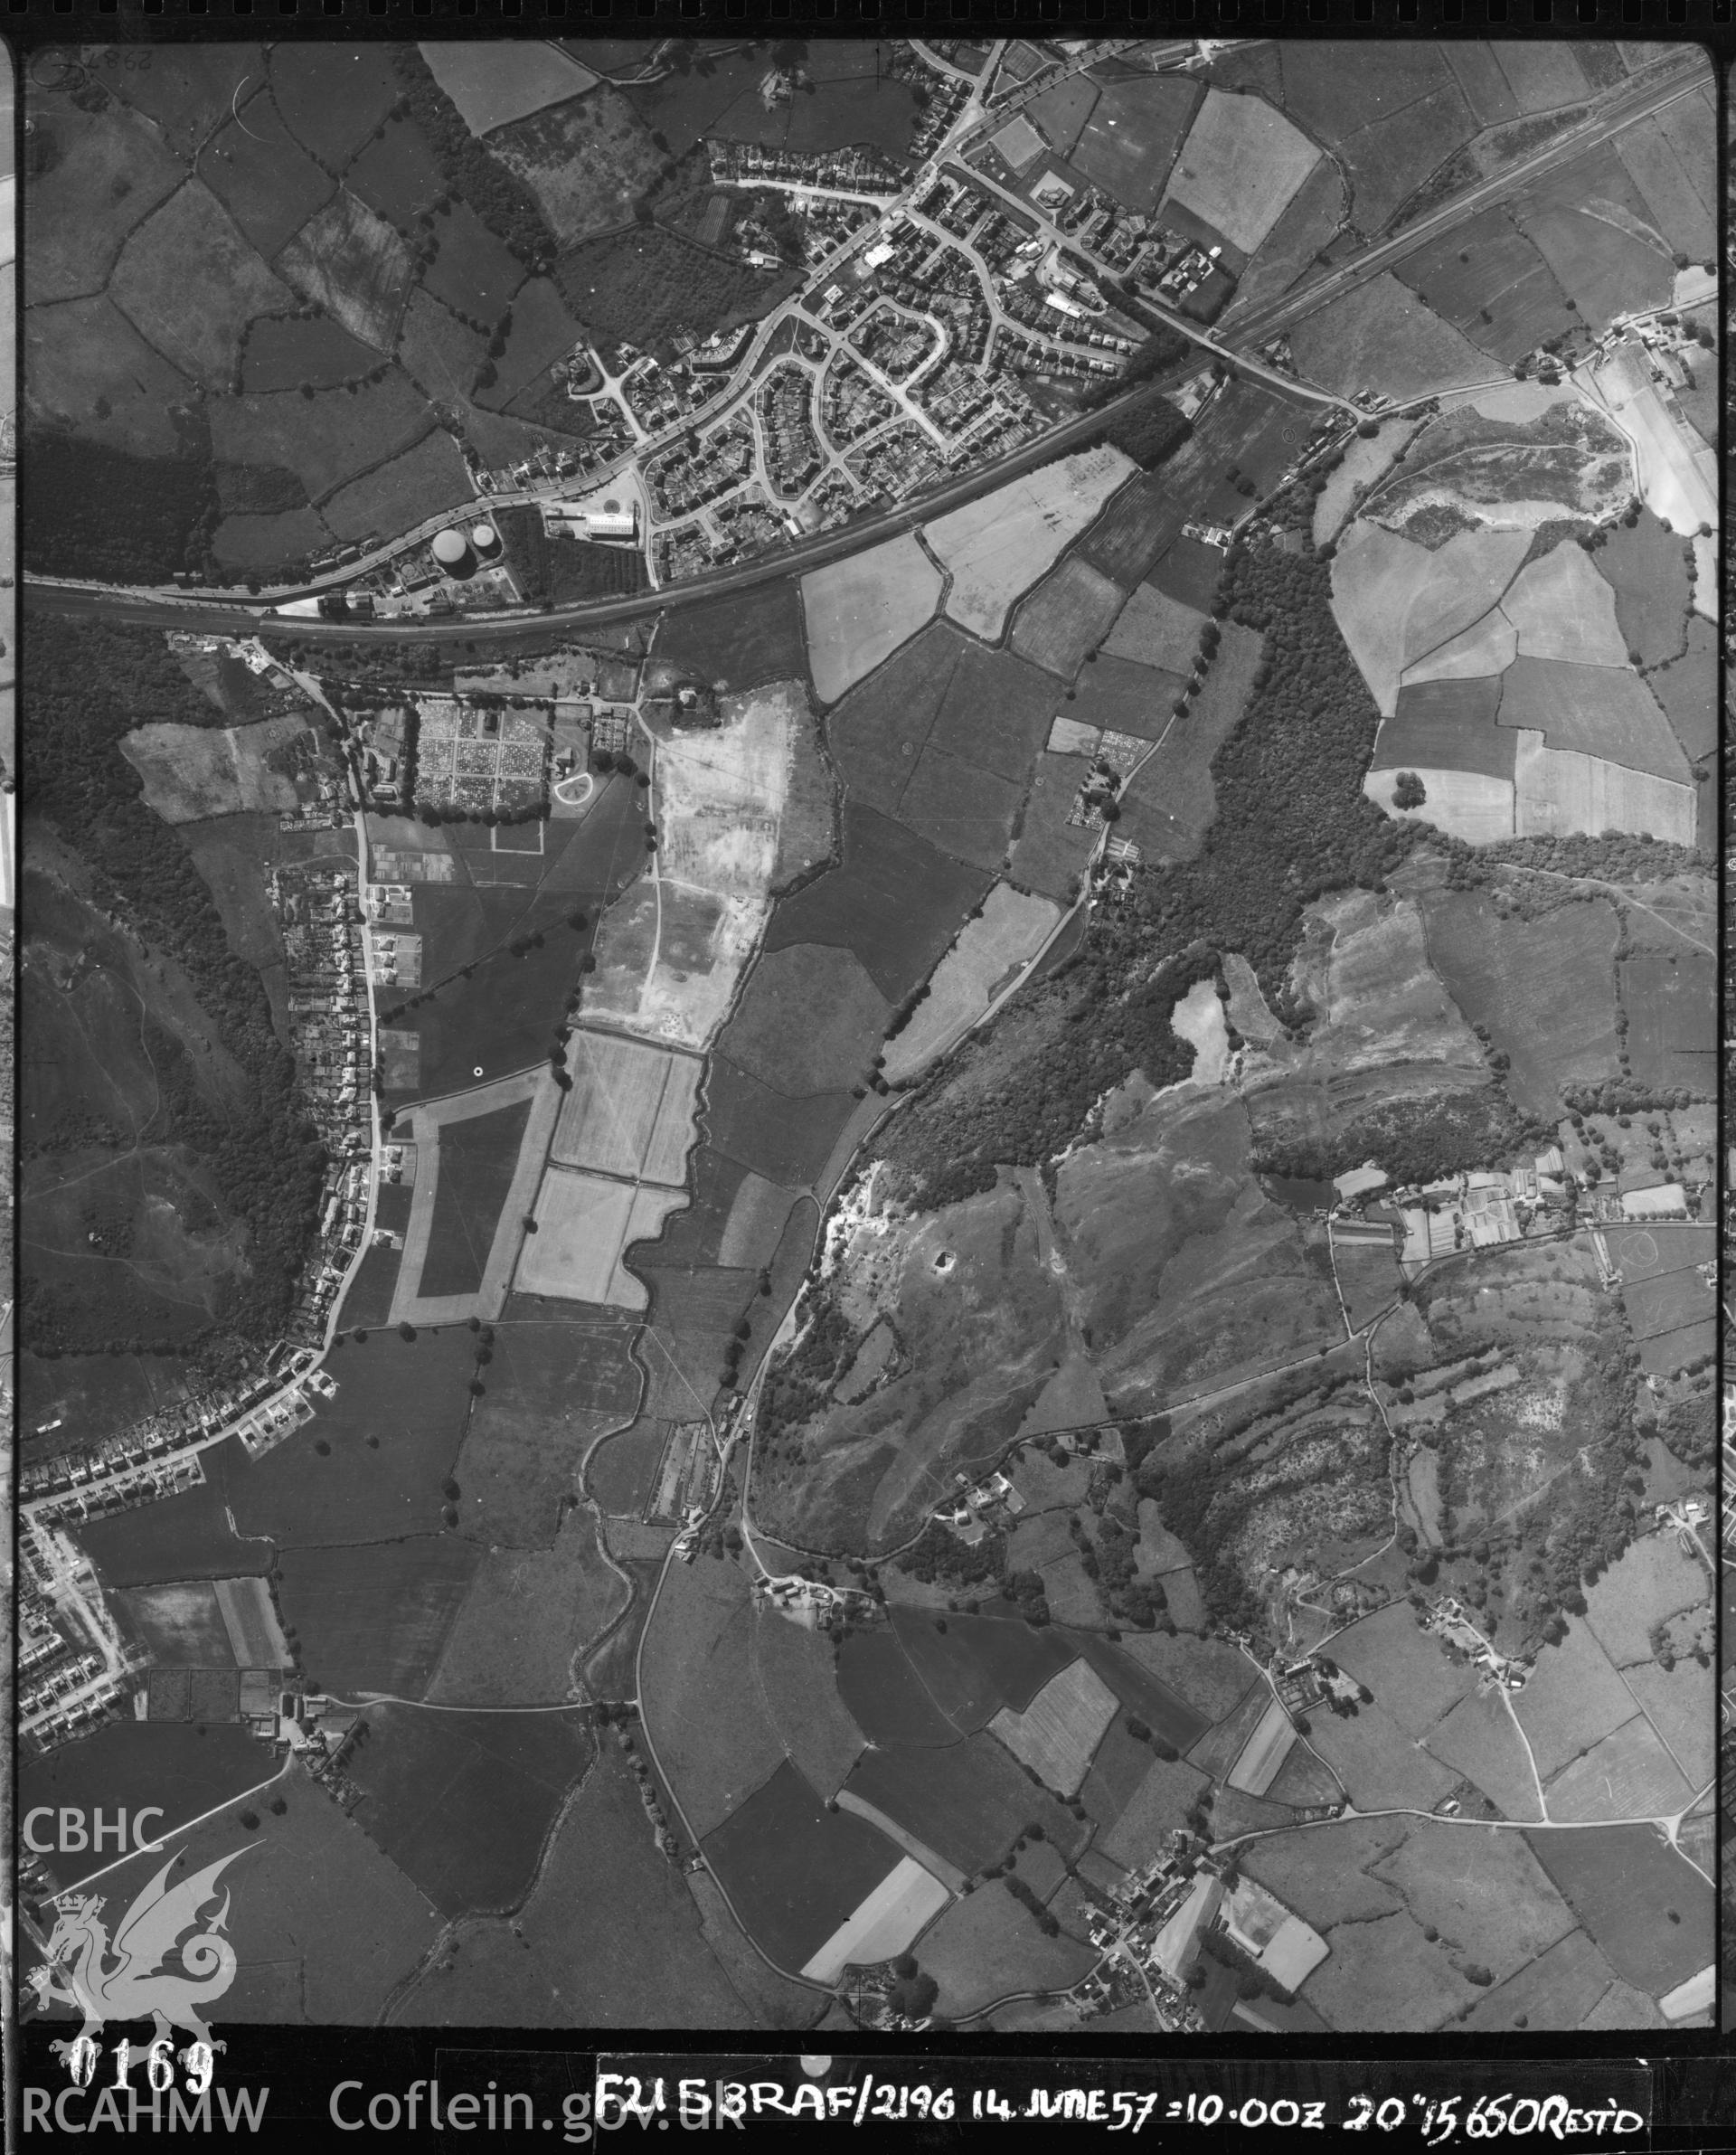 Black and white vertical aerial photograph, taken by the RAF, showing the Llanddulas area 1957.